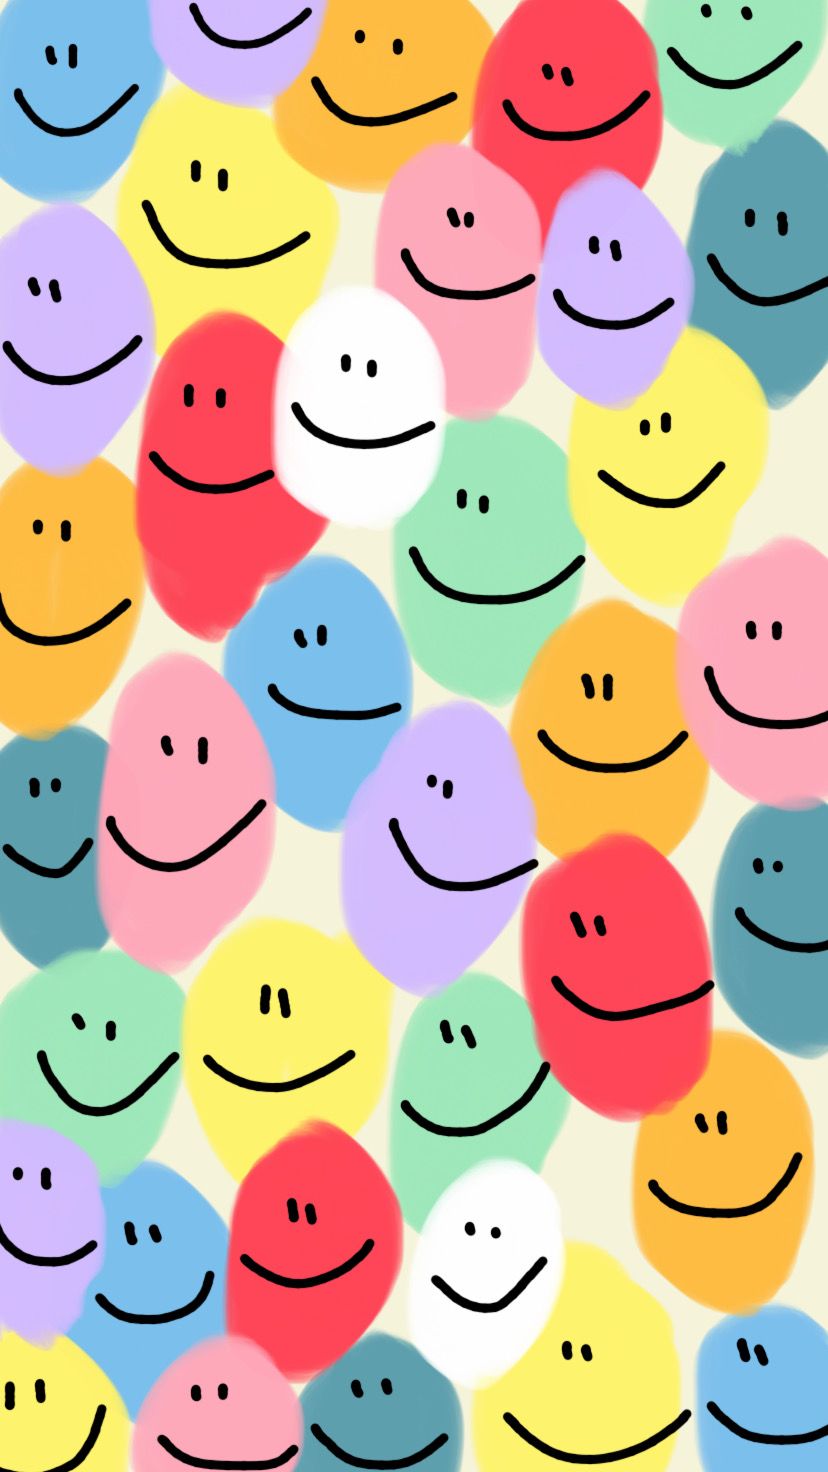 smiley face wallpaper. Cute patterns wallpaper, Picture collage wall, Art collage wall